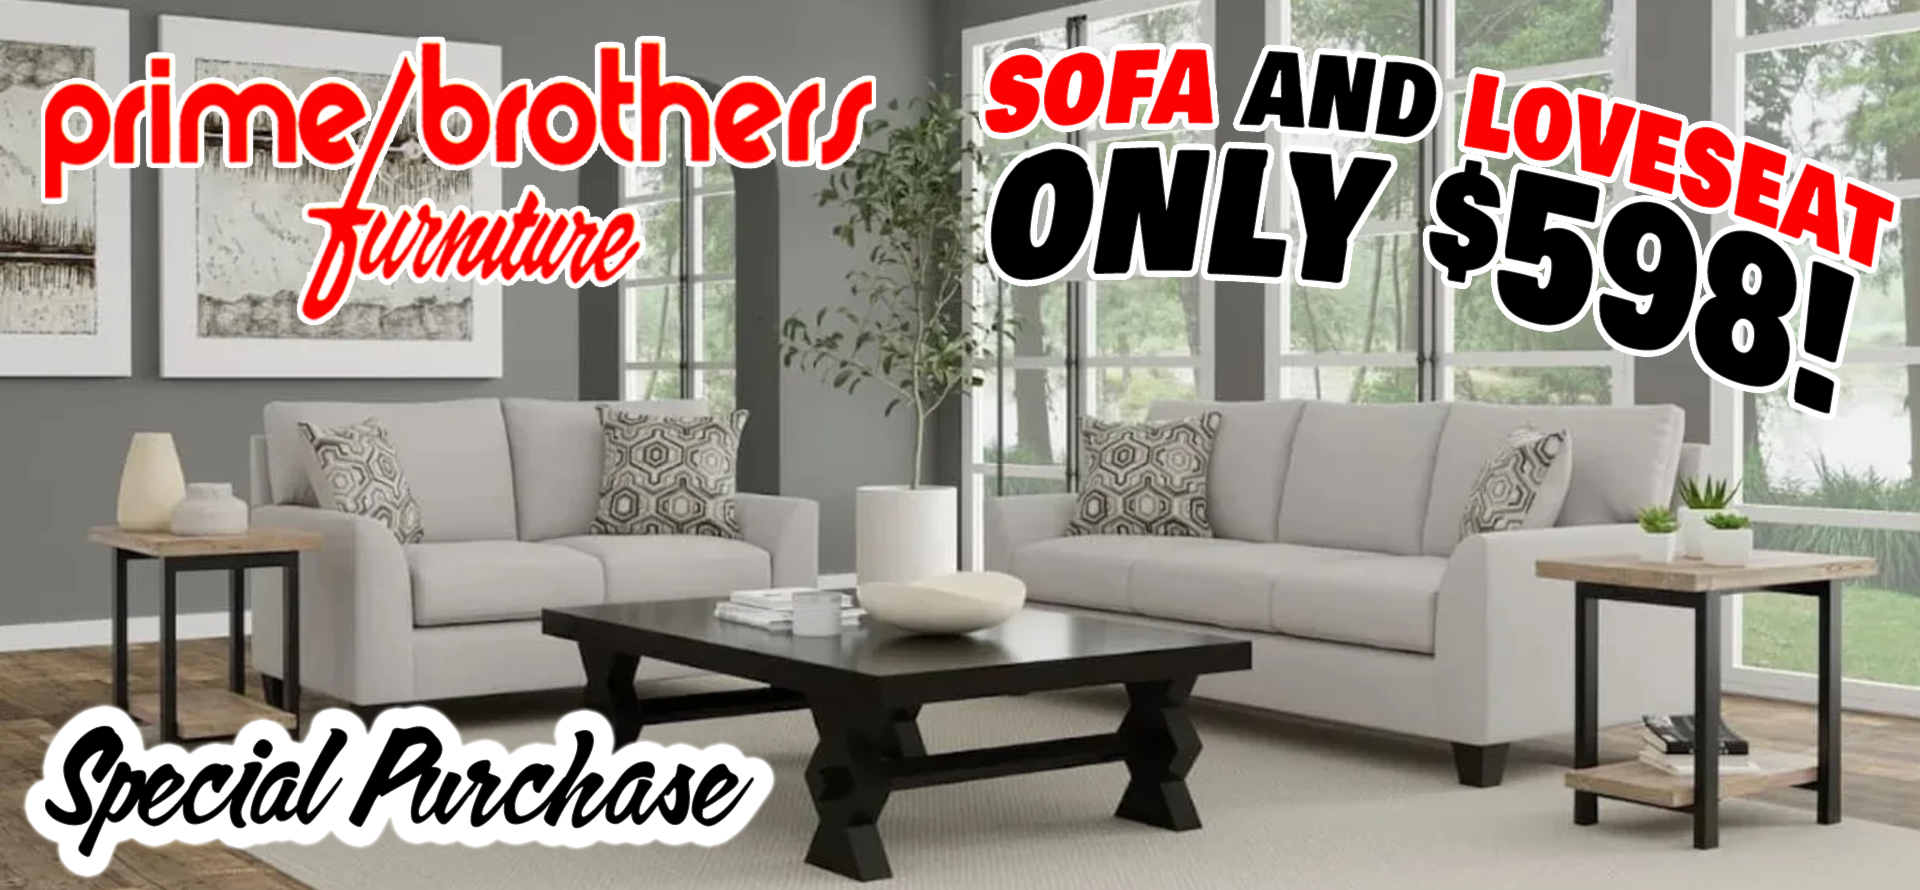 Sofa and Loveseat Only $598